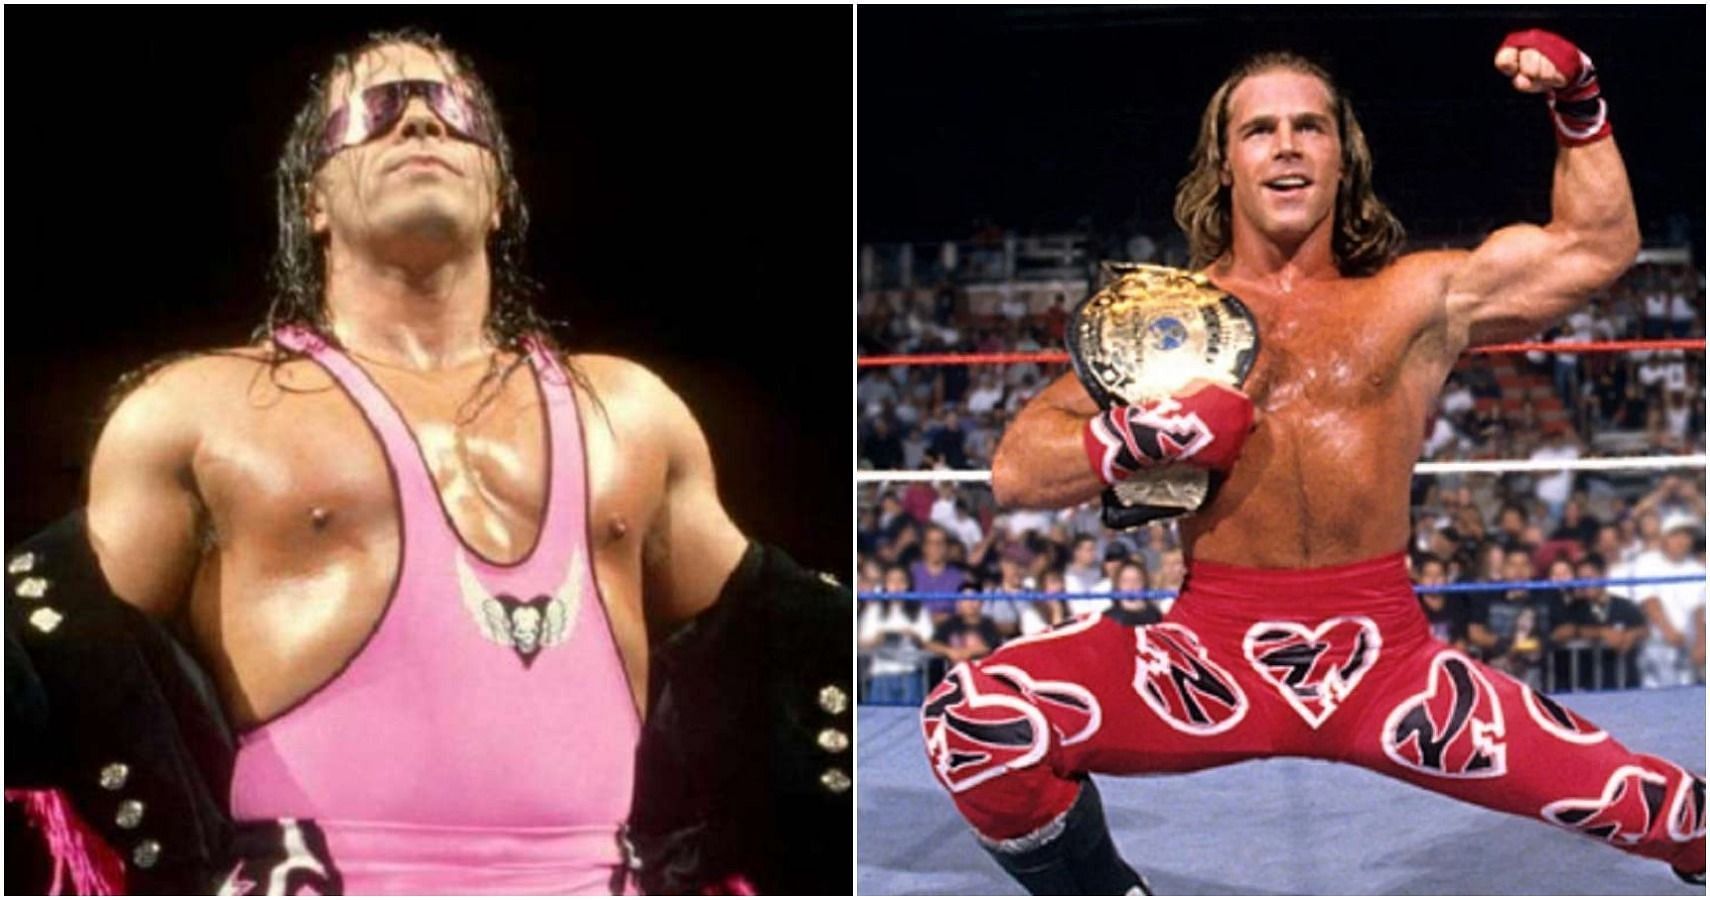 Shawn Michaels and Bret Hart are absolute legends of the professional wrestling business